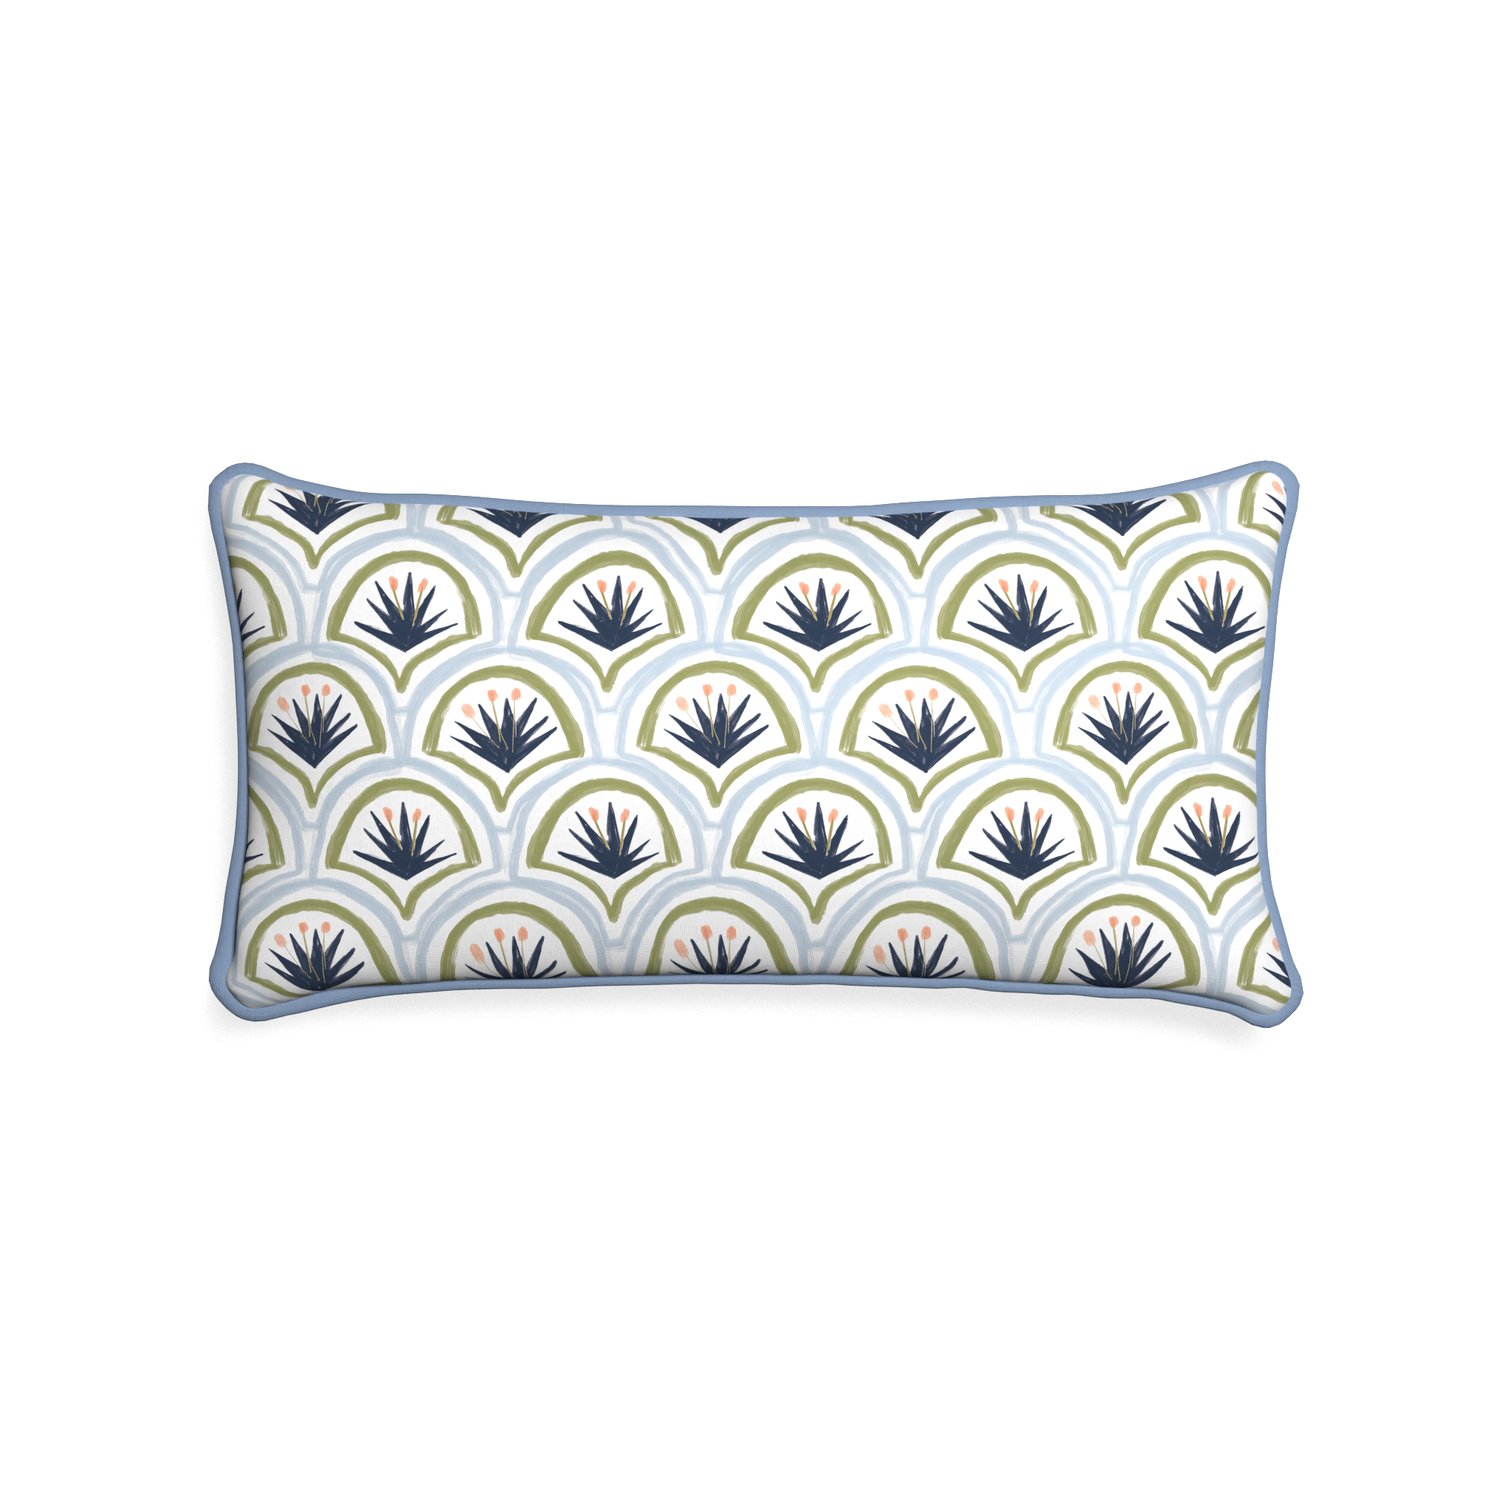 Midi-lumbar thatcher midnight custom art deco palm patternpillow with sky piping on white background